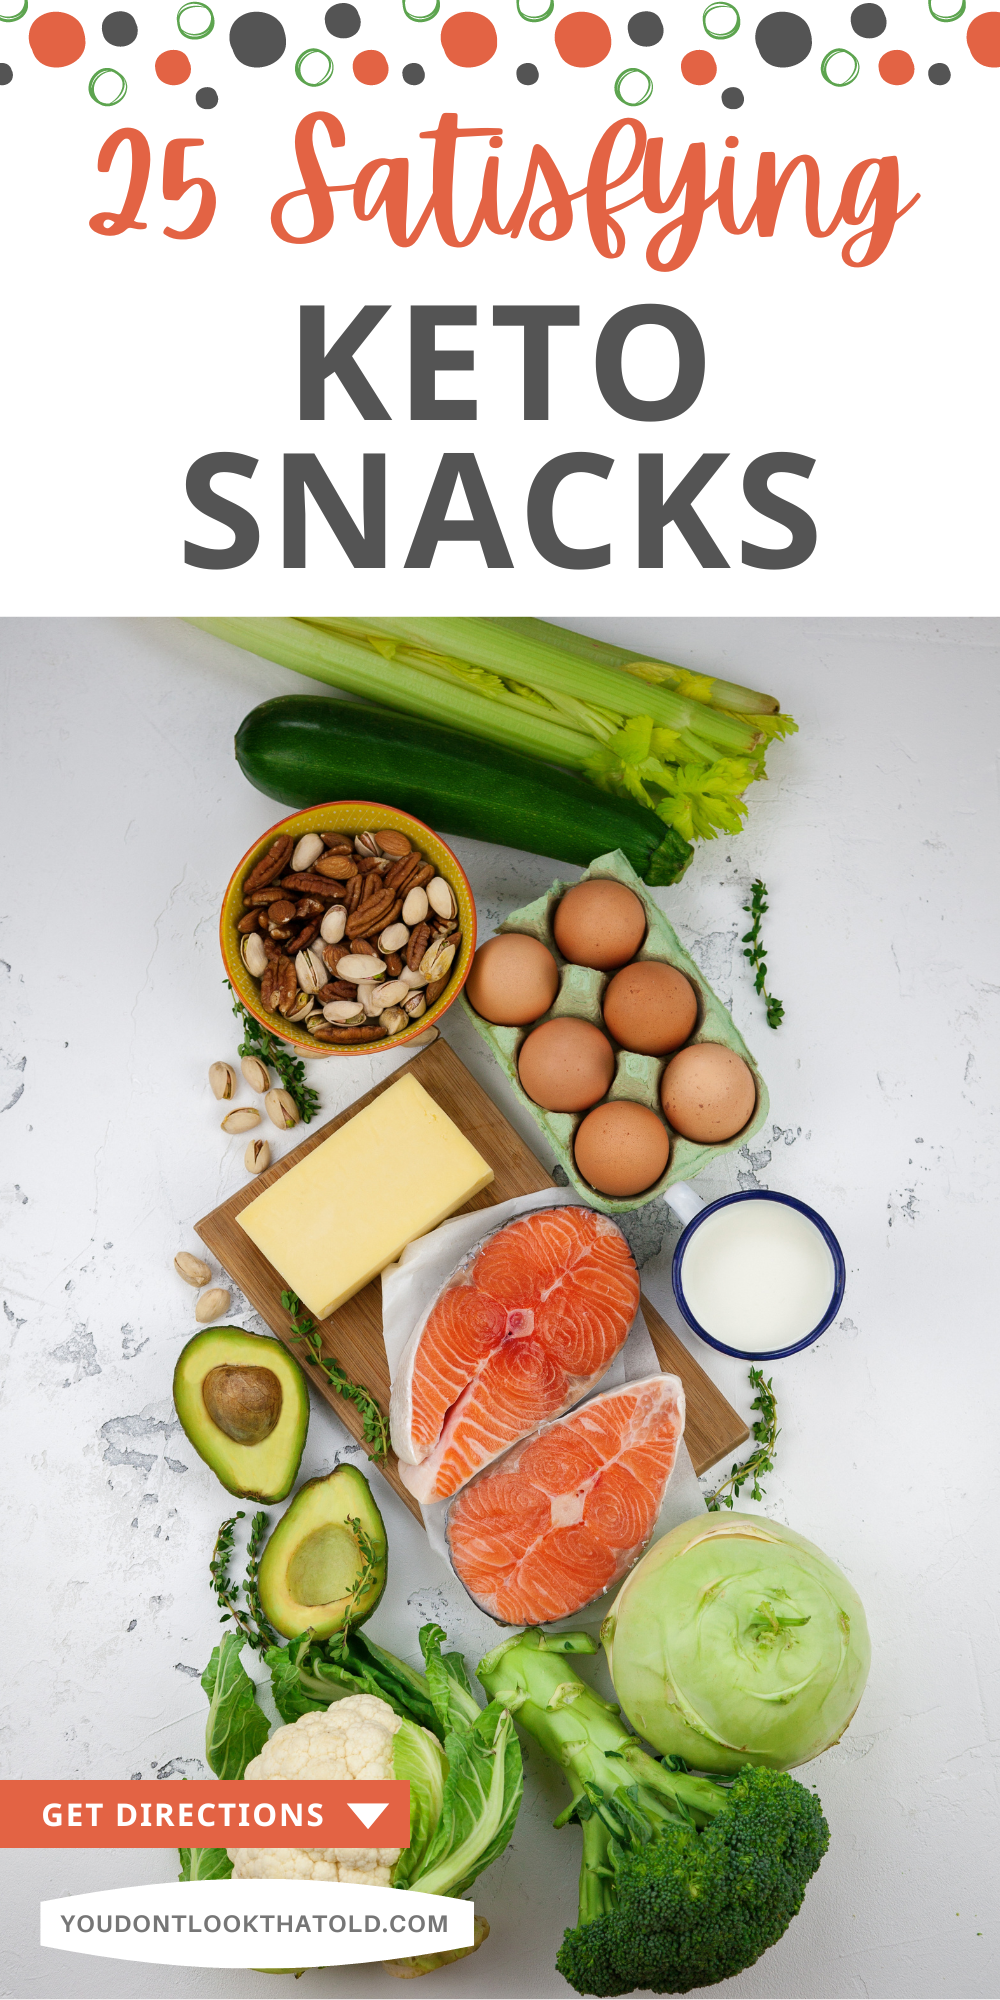 25+ Satisfying Keto Snacks to Easily Add to Your Day